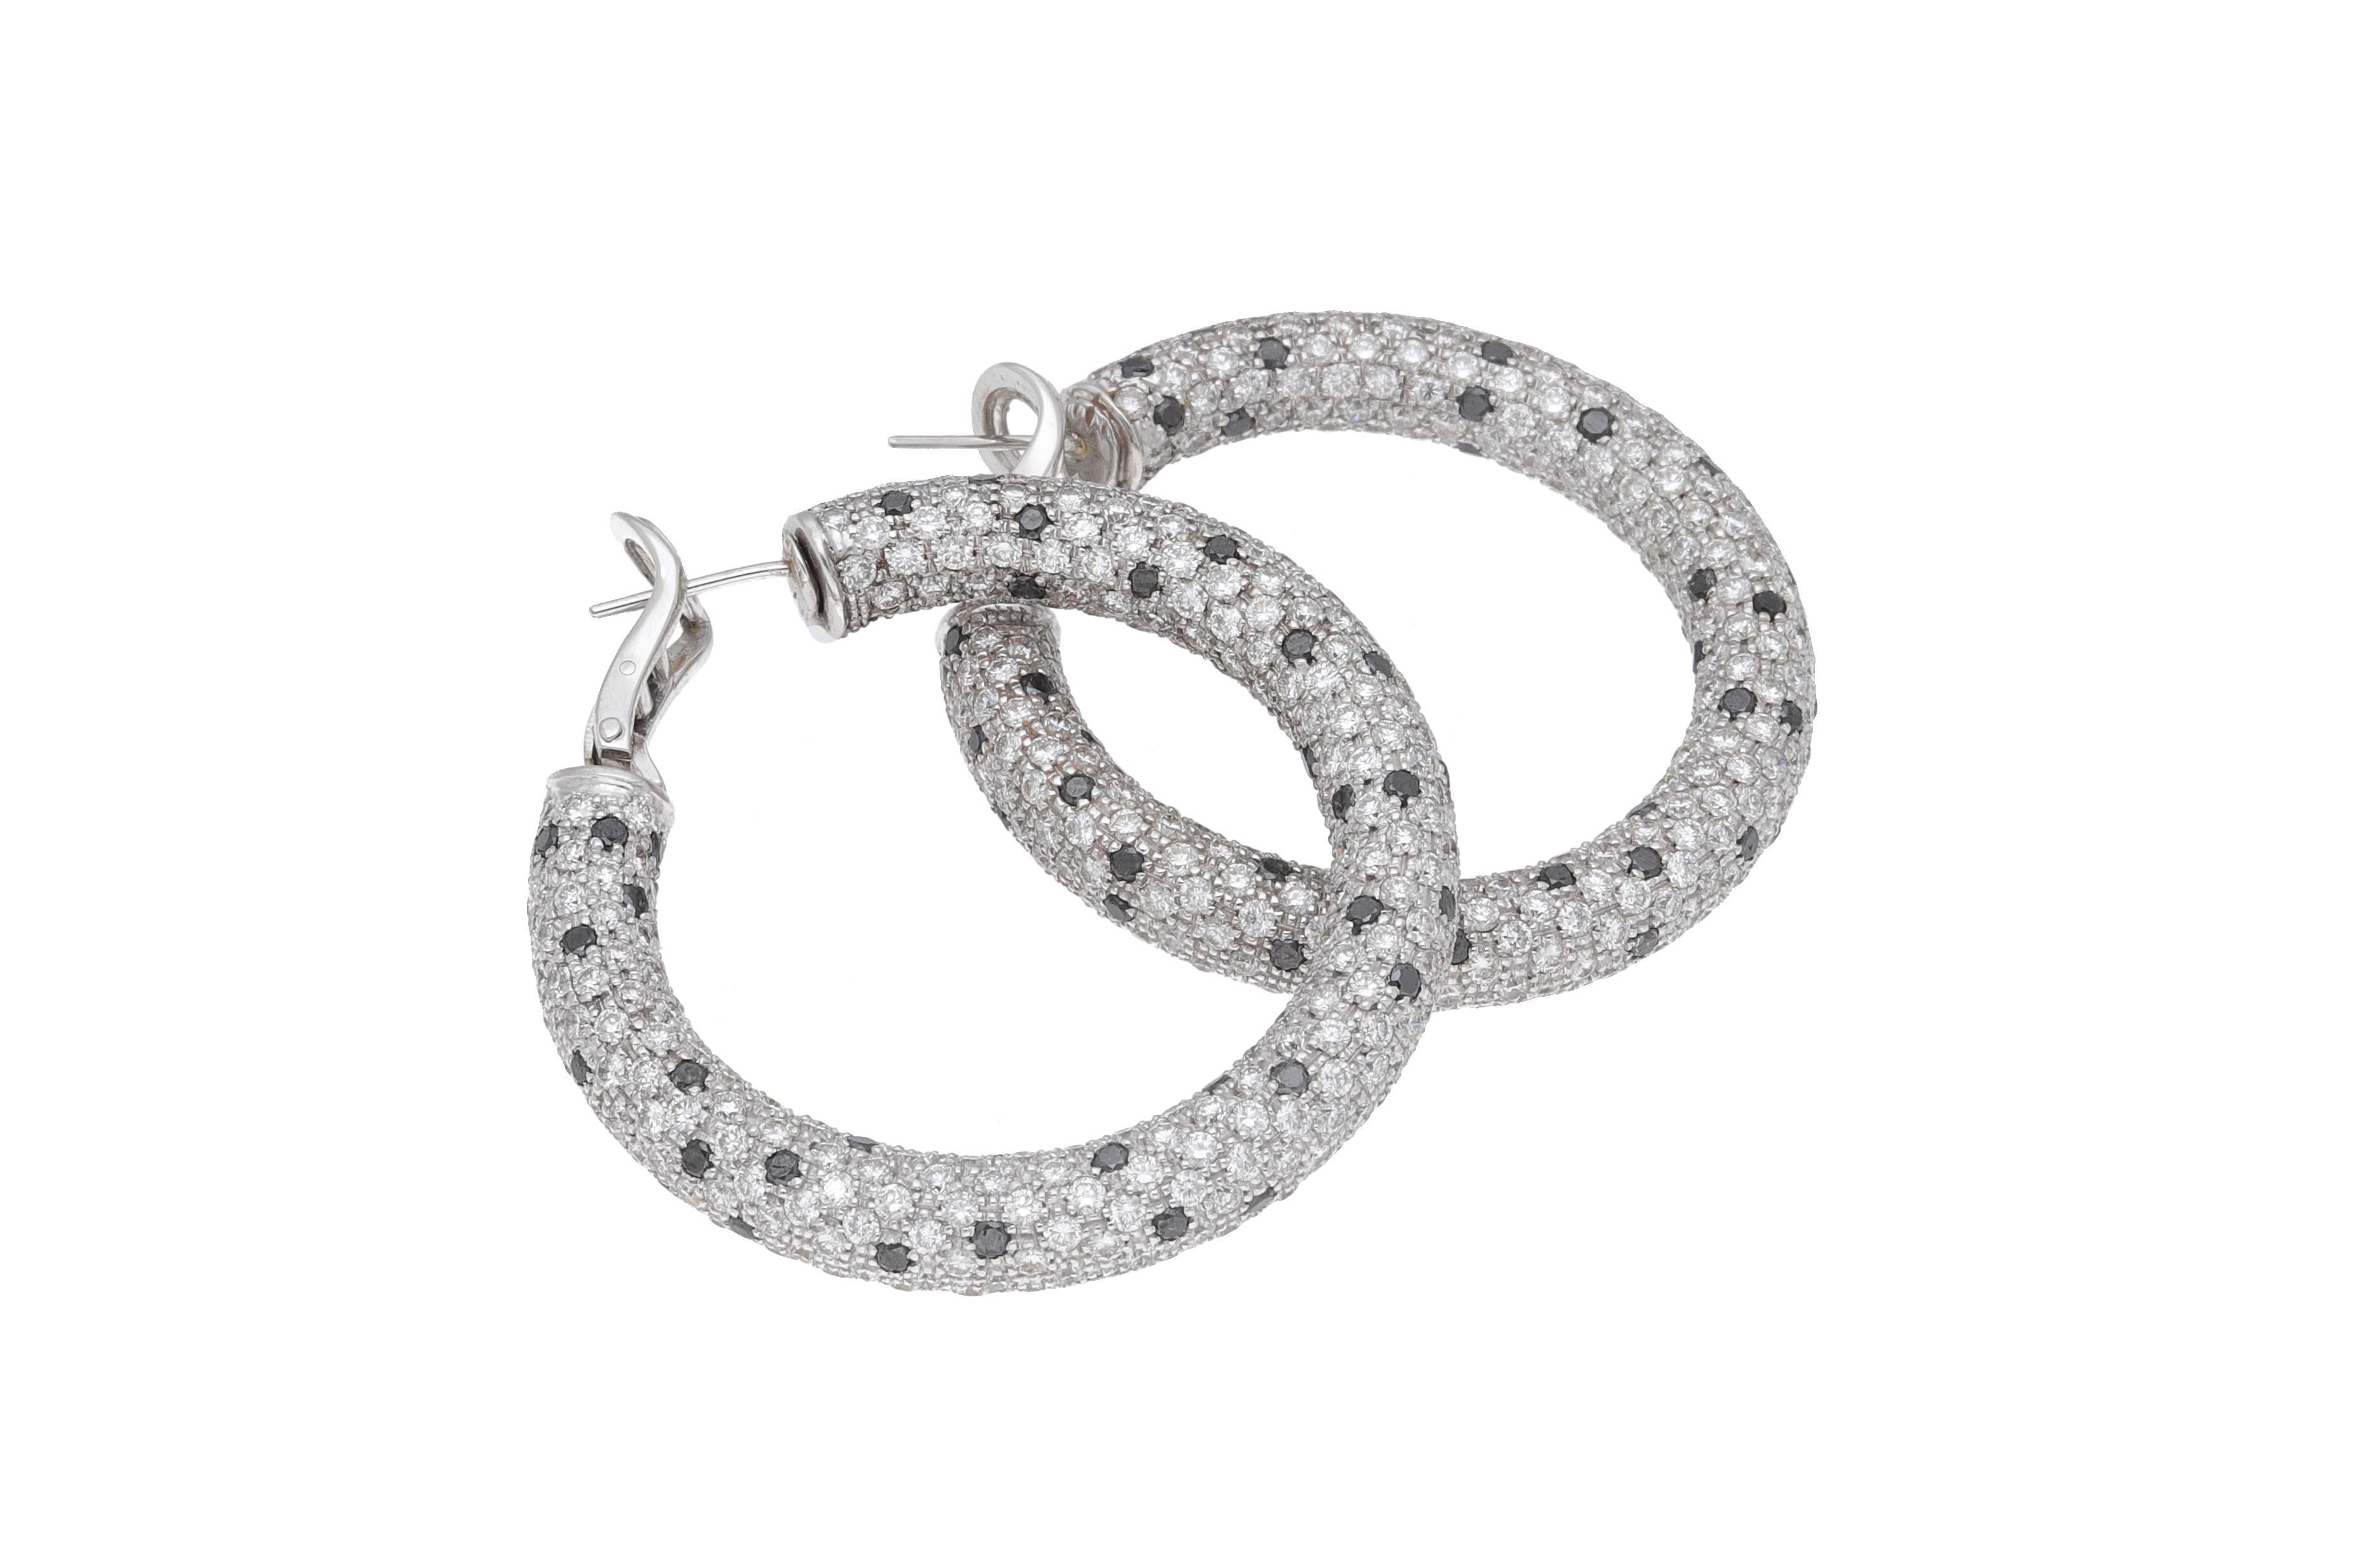 Hoop earrings made entirely by hand in Italy of 18 kt. white gold with white diamonds and black diamonds.
These circles are made with a pavé setting and are one of a kind.
Diamond Fraleoni Collection.
The alternation of white and black diamonds